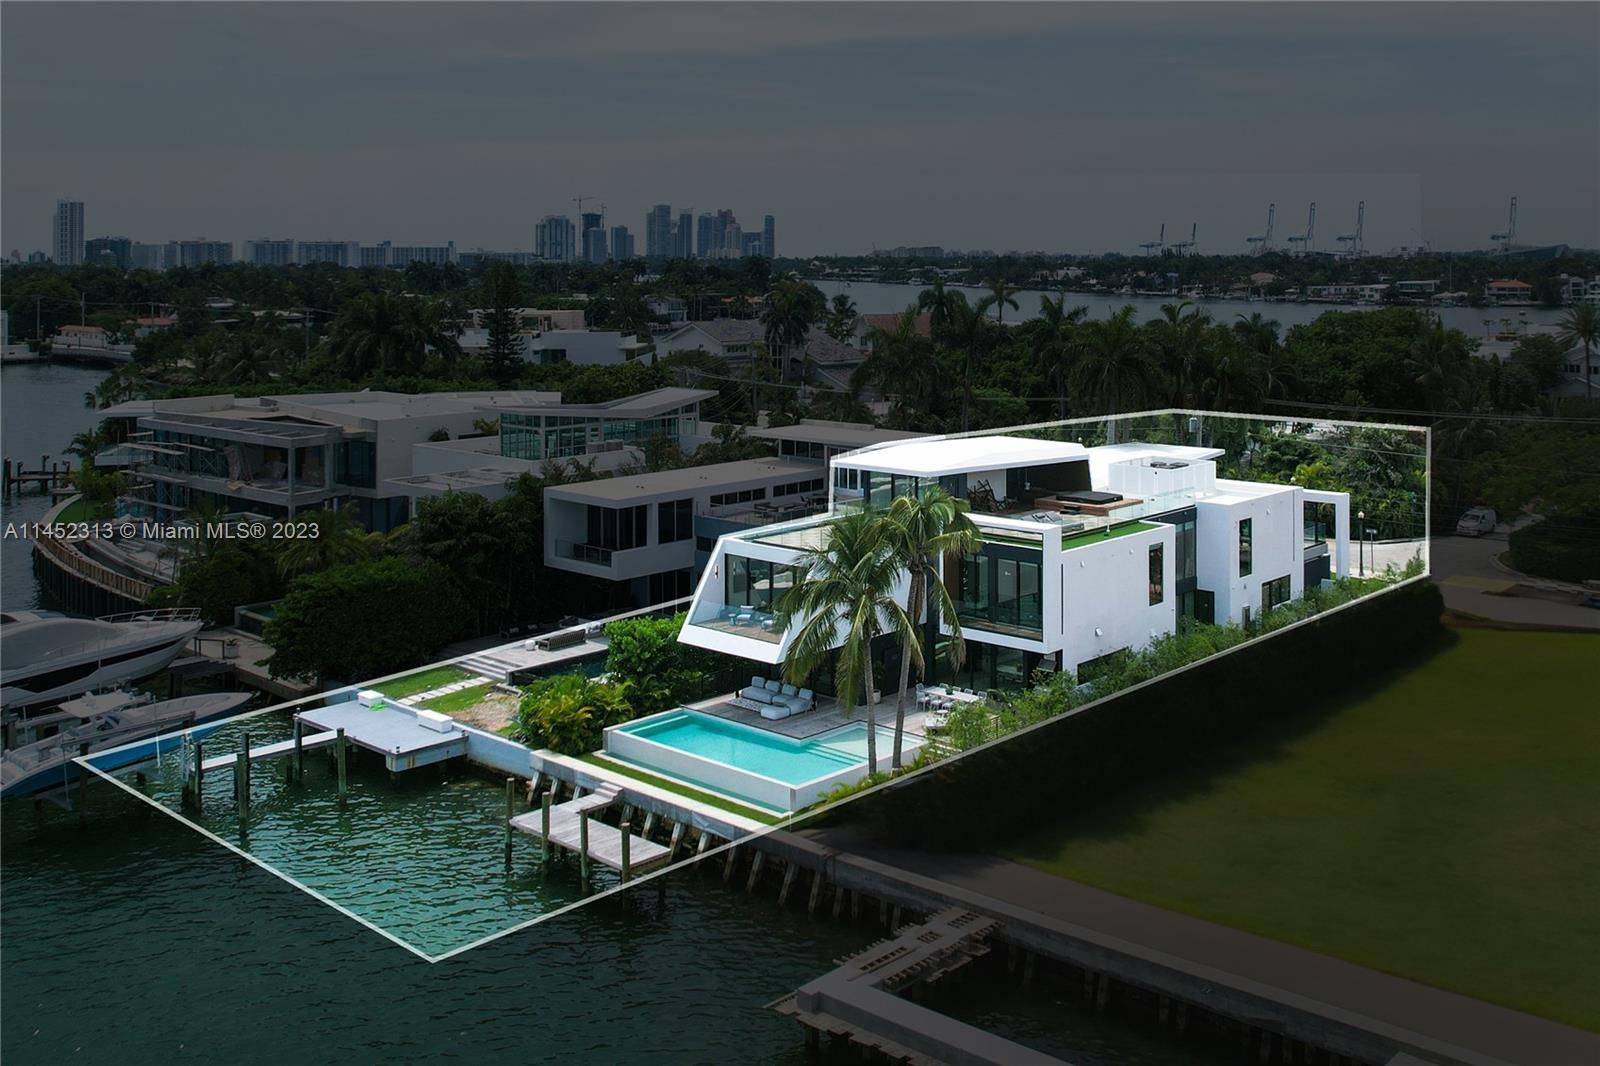 OPEN BAY VIEWS ON THE VENETIAN ISLANDS FROM THIS MODERN TROPICAL WATERFRONT ESTATE MASTERFULLY DESIGNED BY TOGU DESIGN !